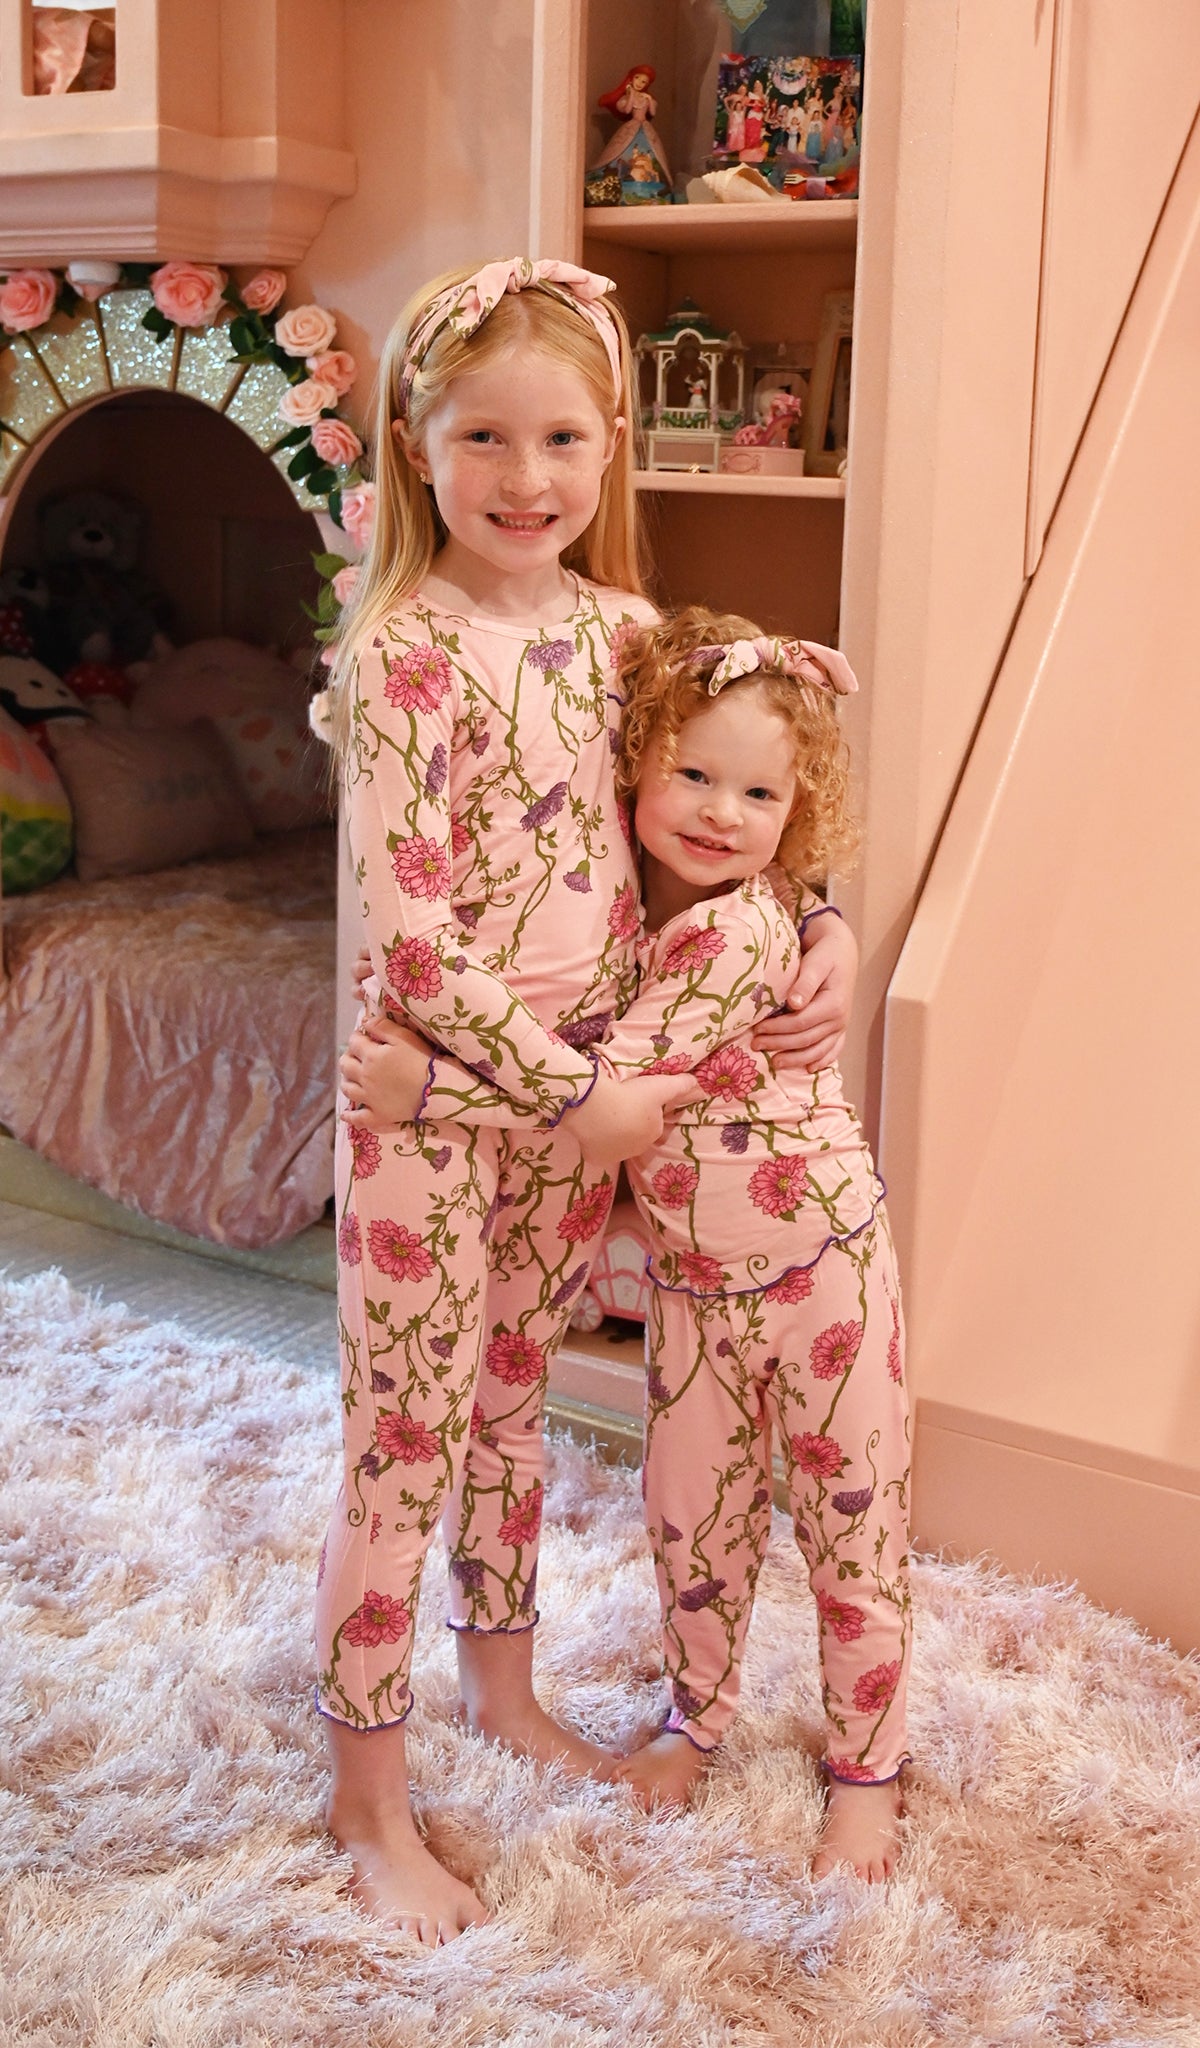 Dahlia Charlie Kids 3-Piece Pant PJ worn by little girl hugging her baby sister, who is also wearing the same PJ.